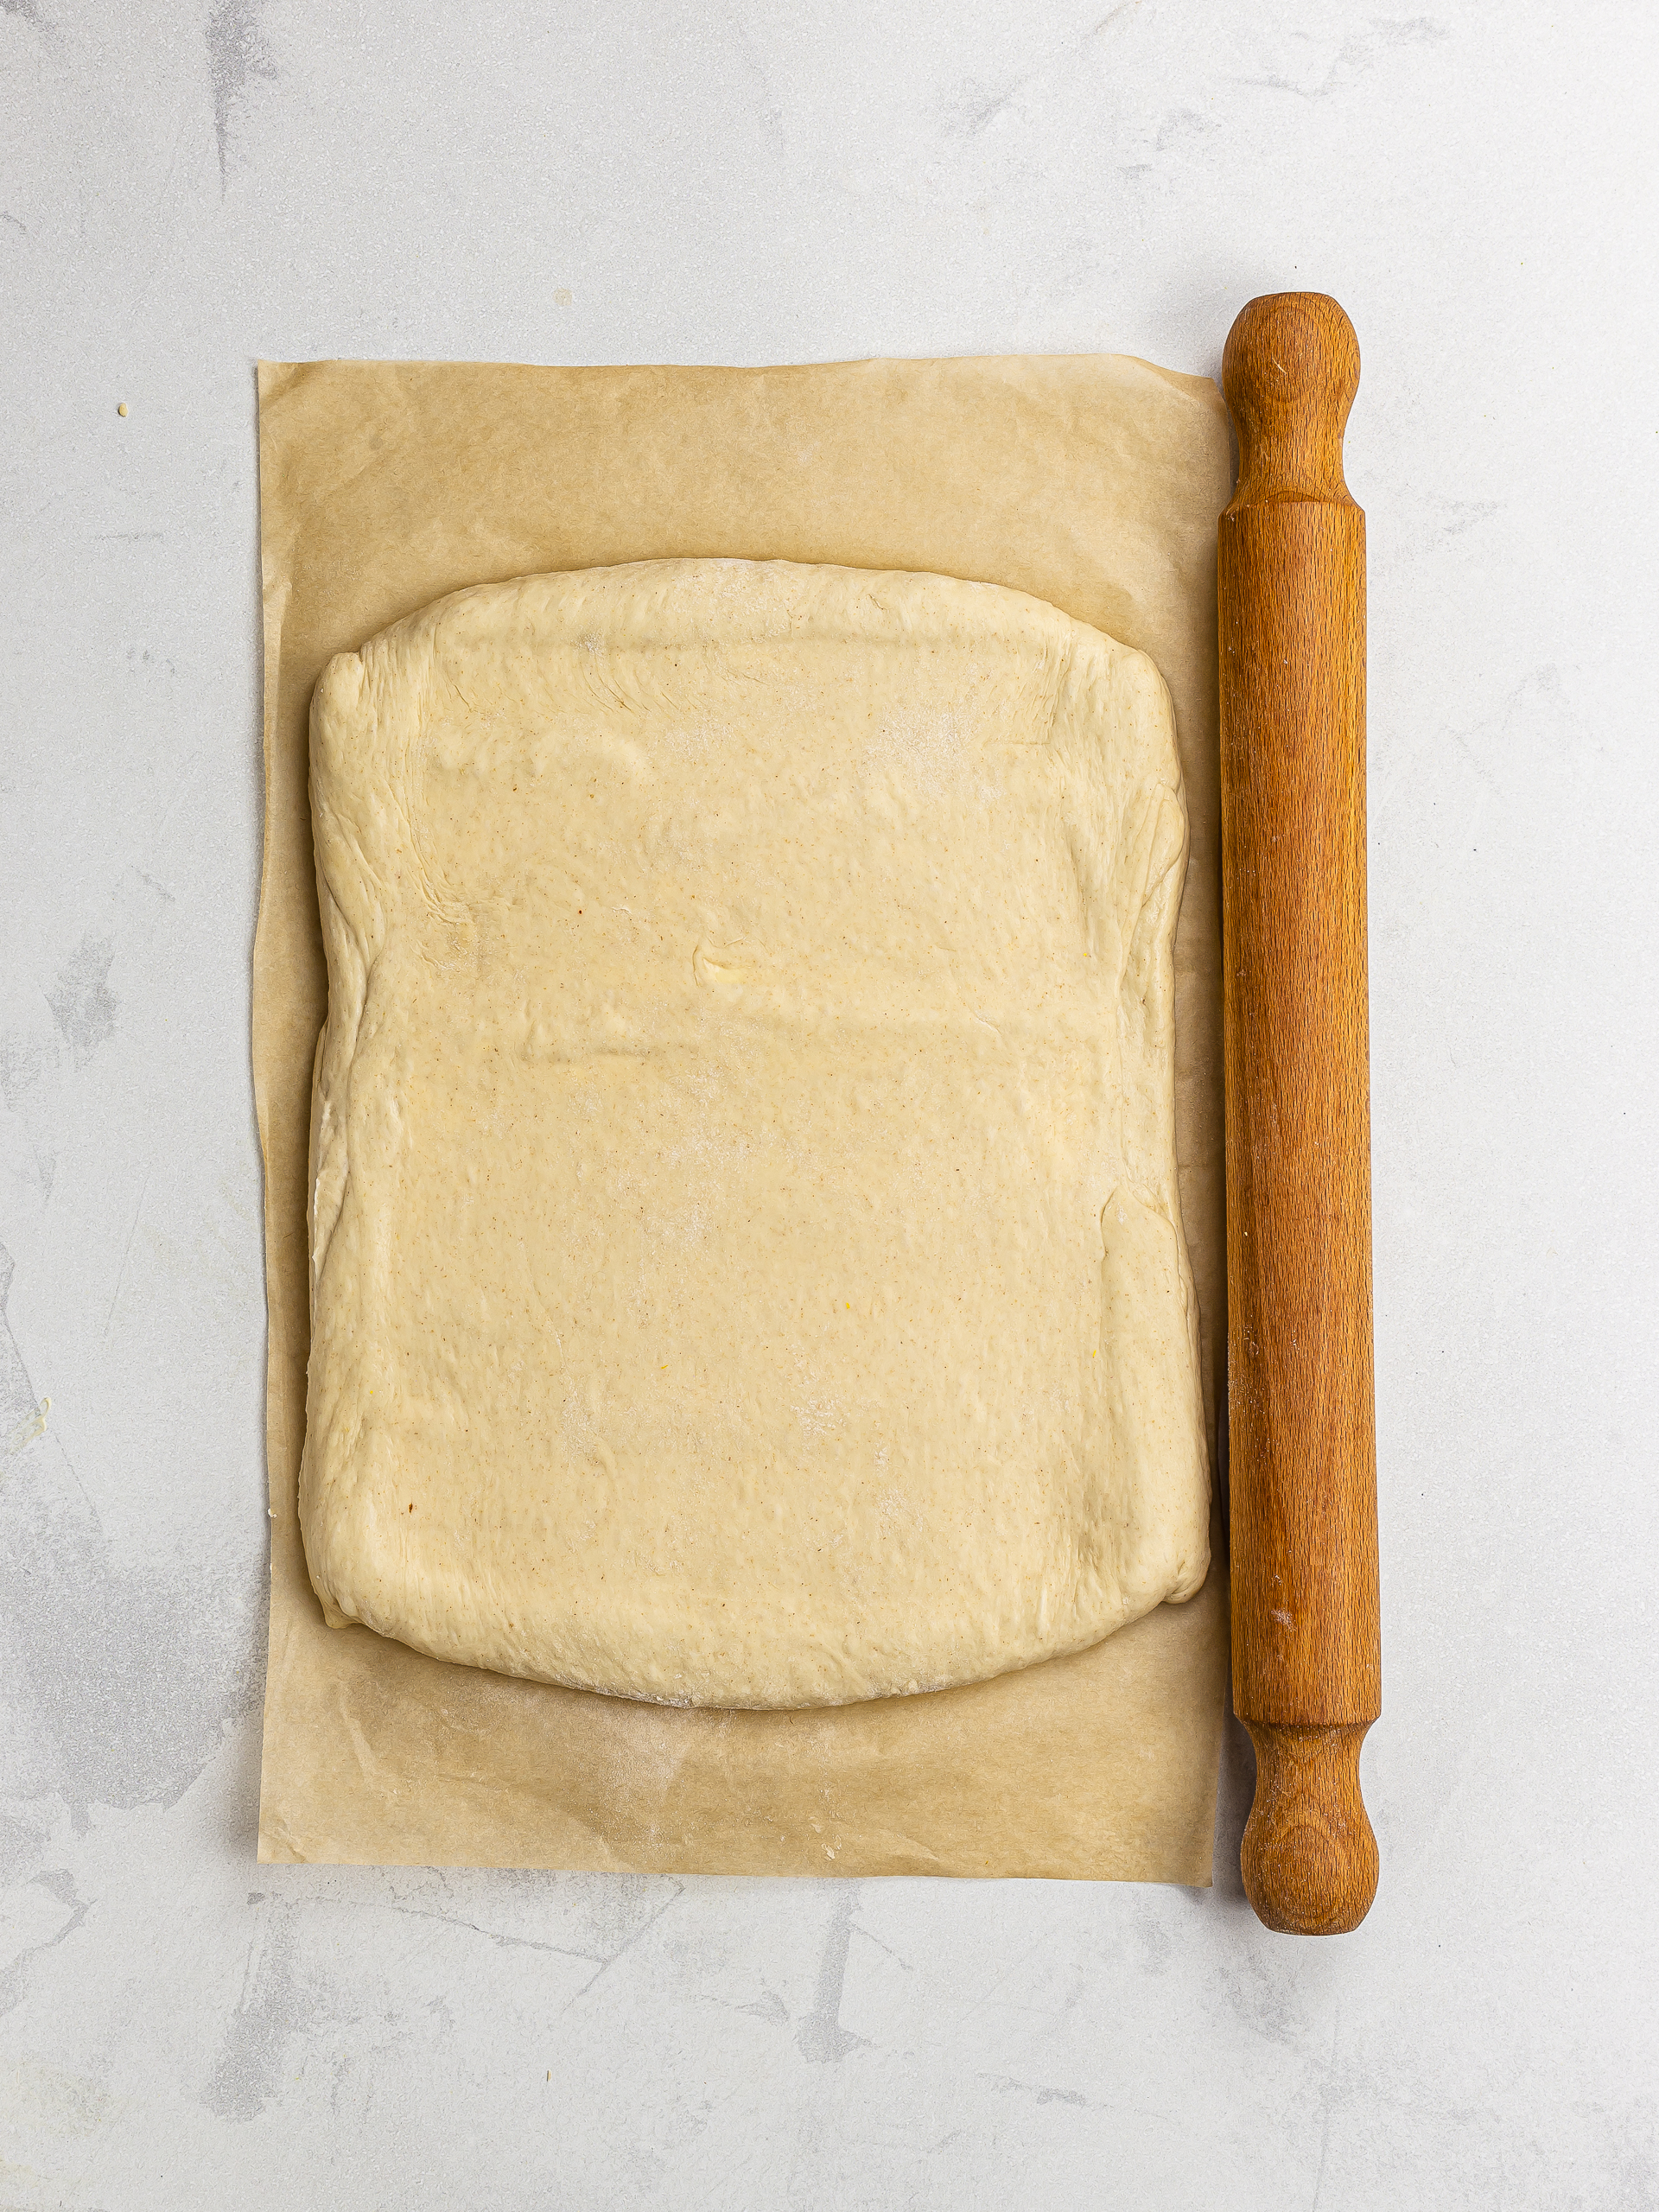 rolled out vegan pastry dough